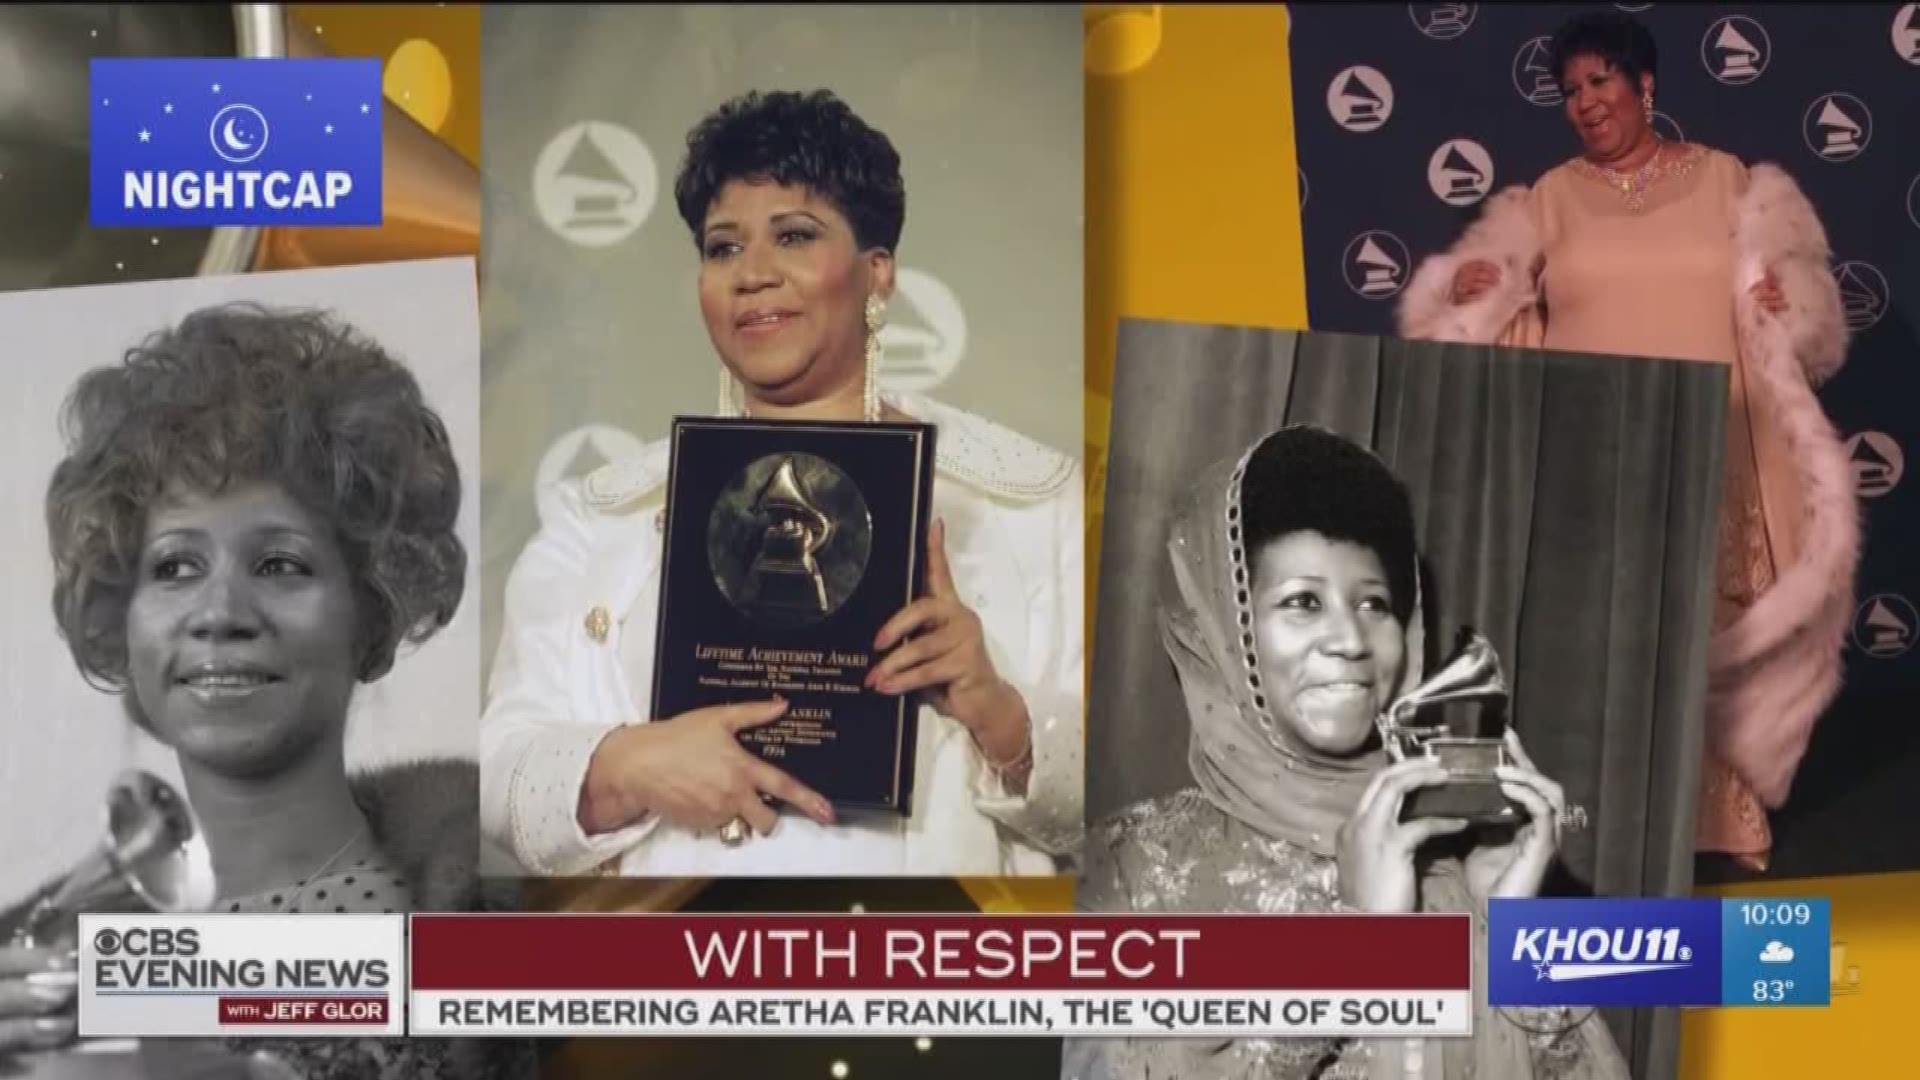 Remembering the incomparable "Queen of Soul" Aretha Franklin, plus other top stories on Aug. 16, 2018, in your nightcap.